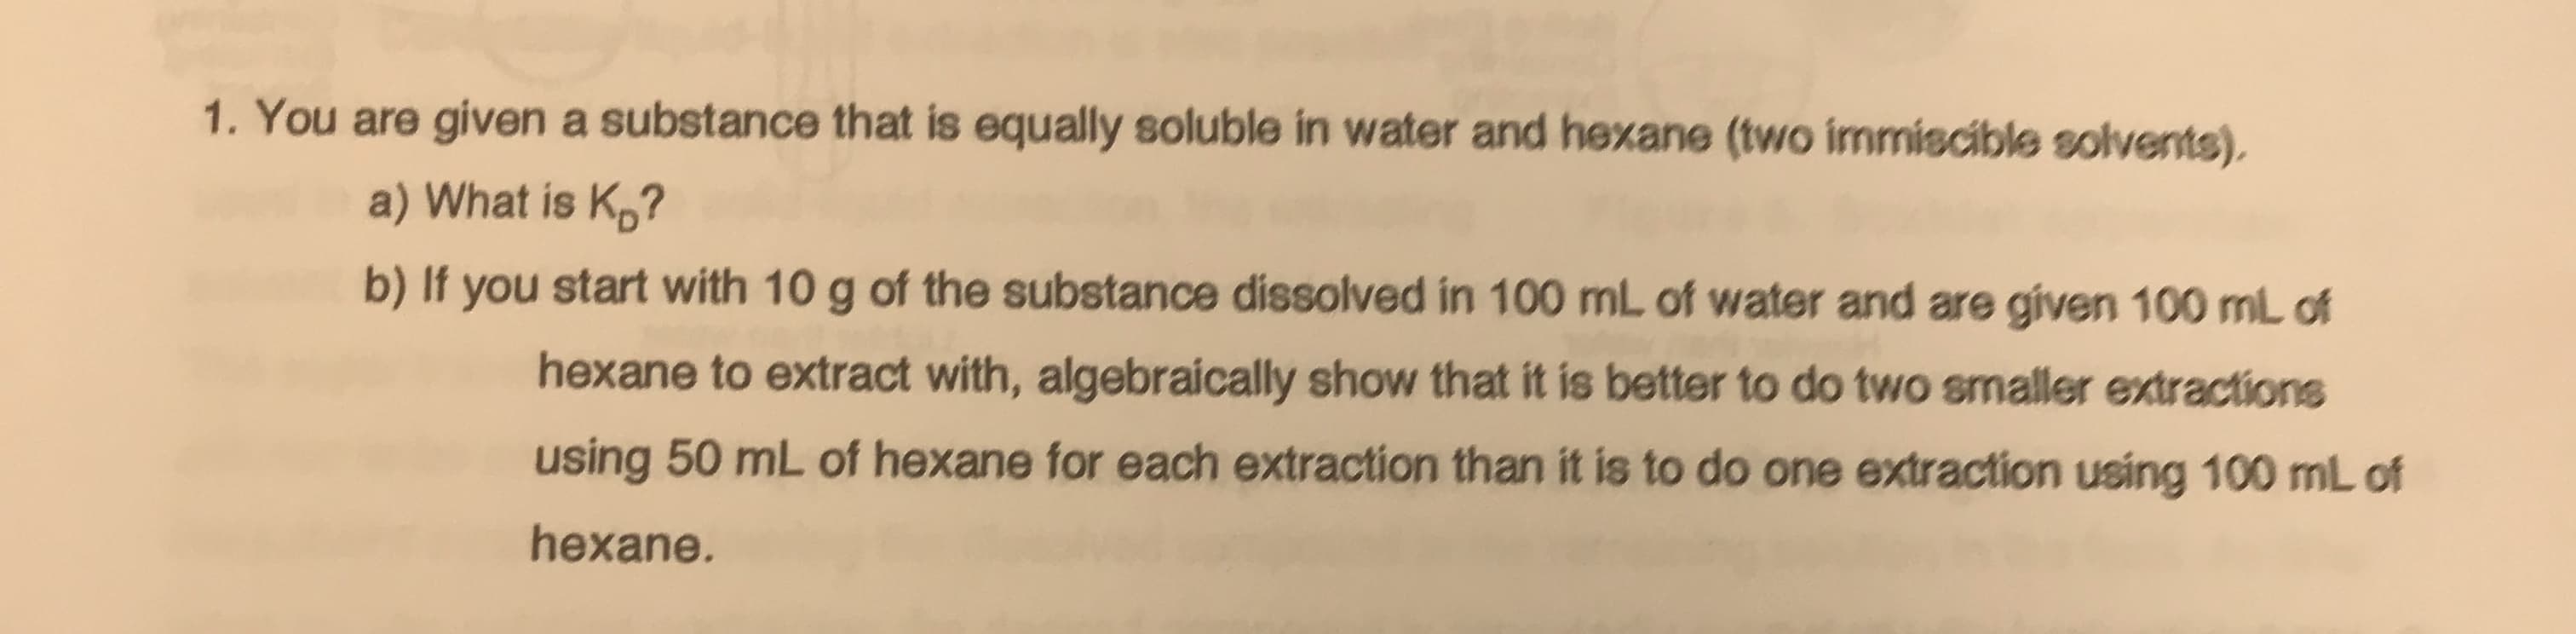 1. You are given a substance that is equally soluble in water and hexane (two immiscible solvents).
a) What is Kp?
b) If you start with 10 g of the substance dissolved in 100 mL of water and are given 100 mL of
hexane to extract with, algebraically show that it is better to do two smaller extractions
using 50 mL of hexane for each extraction than it is to do one extraction using 100 mL of
hexane.
